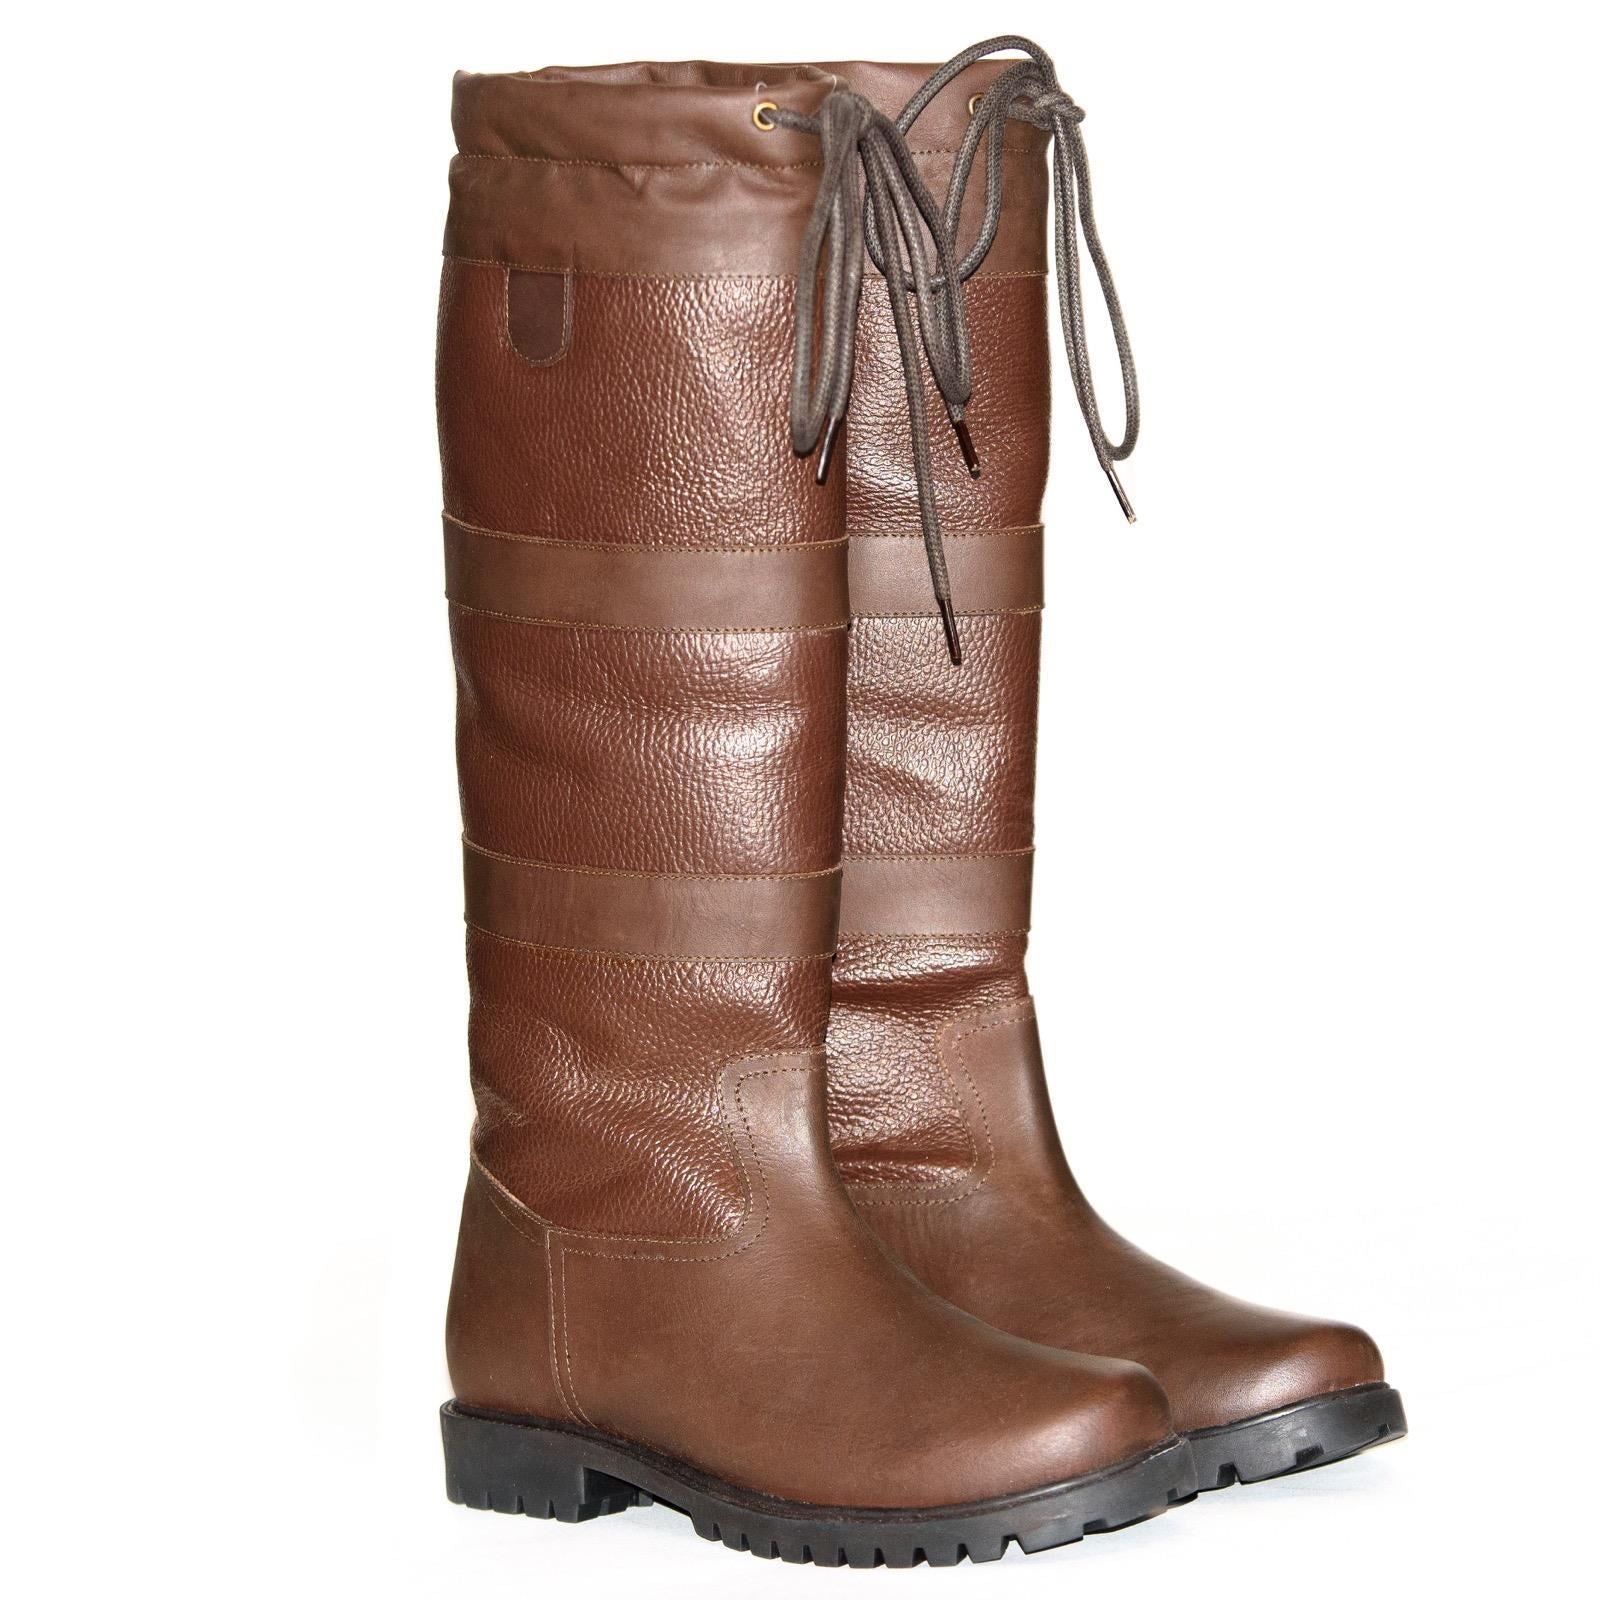 Country Waterproof Ladies Womens Boots Tall Long Horse Riding Boots Brown UK 4-9